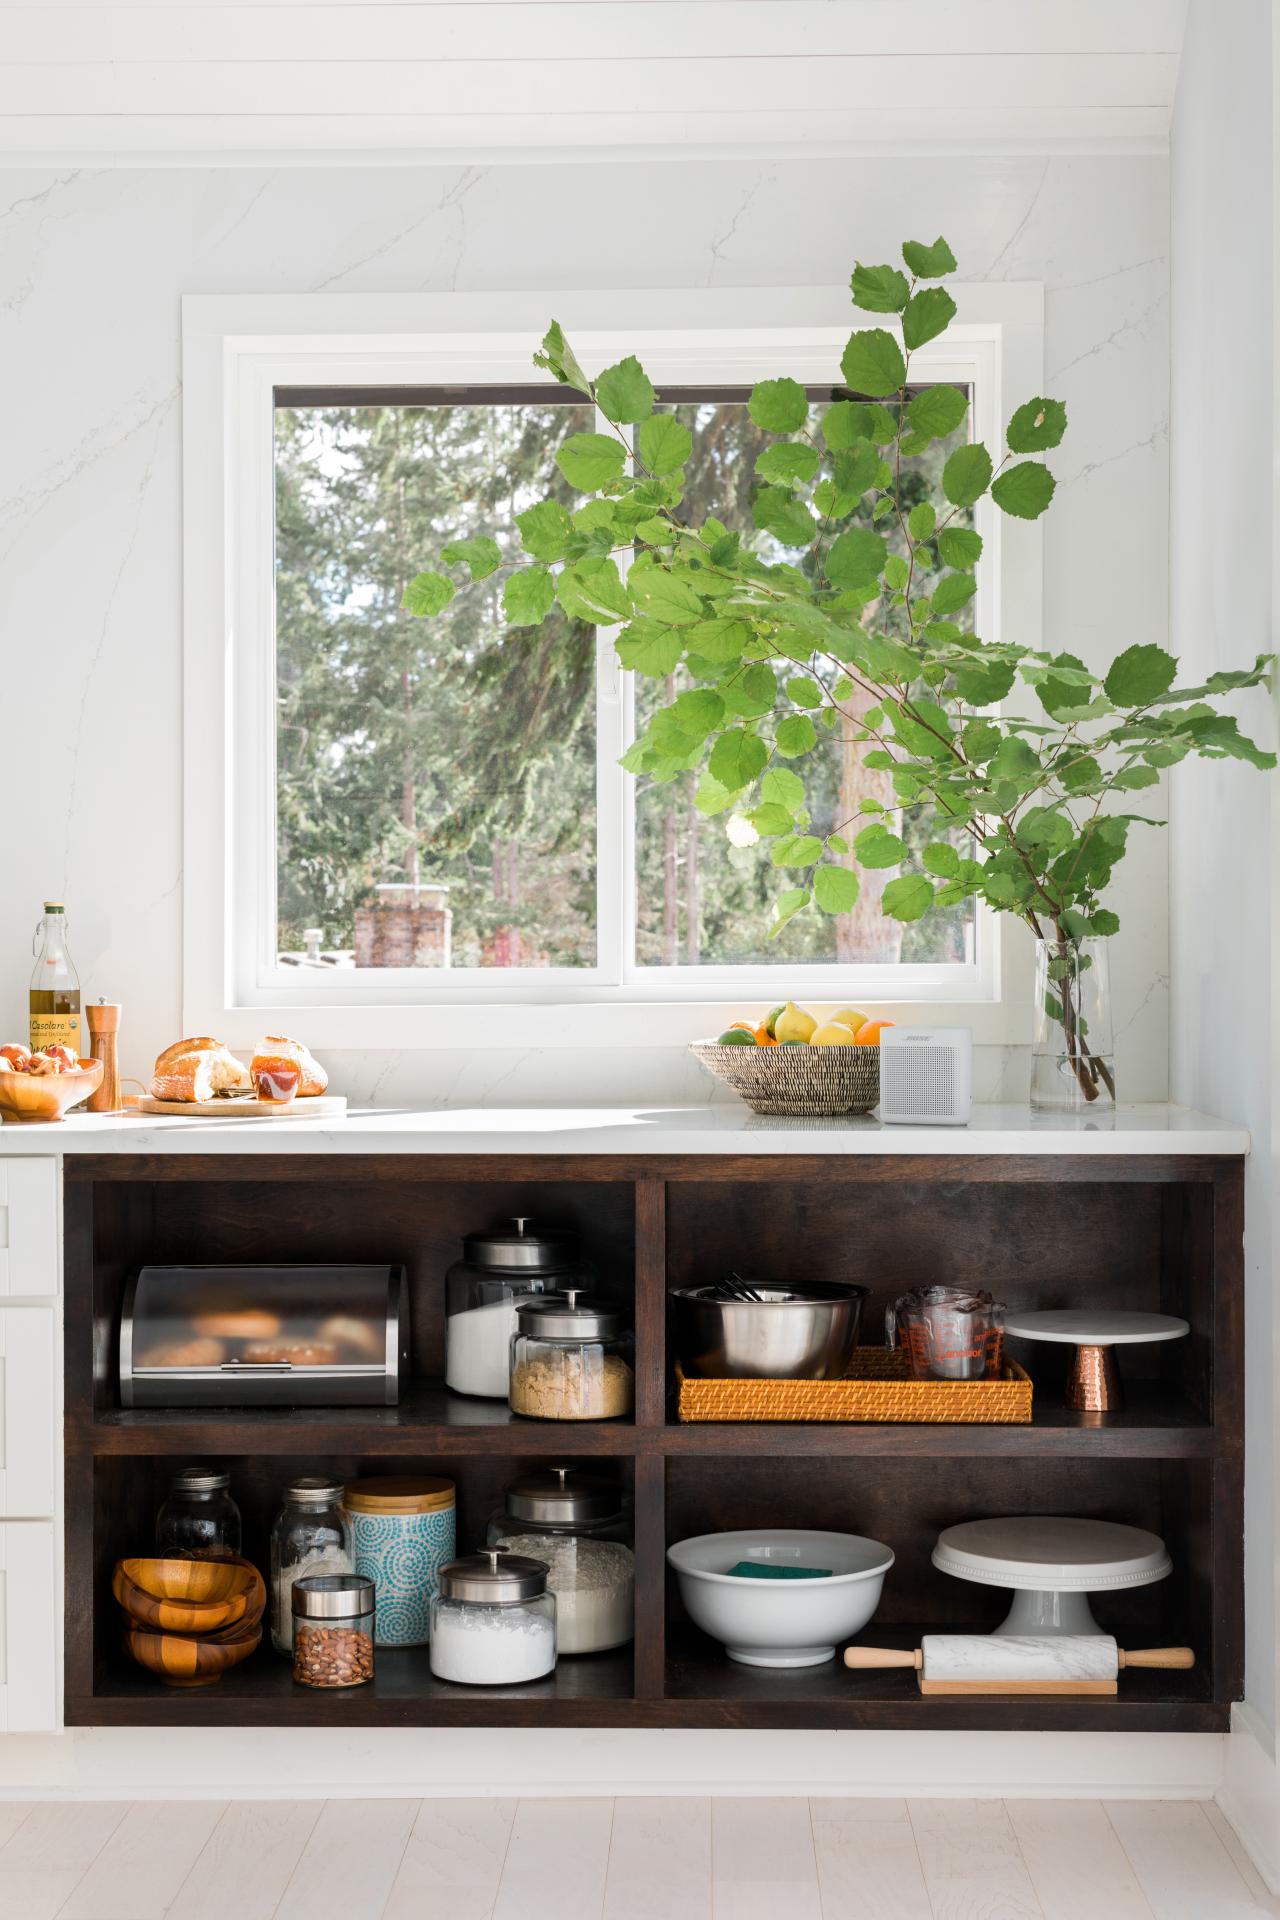 20 Kitchen Open Shelf Ideas - How to Use Open Shelving in Kitchens